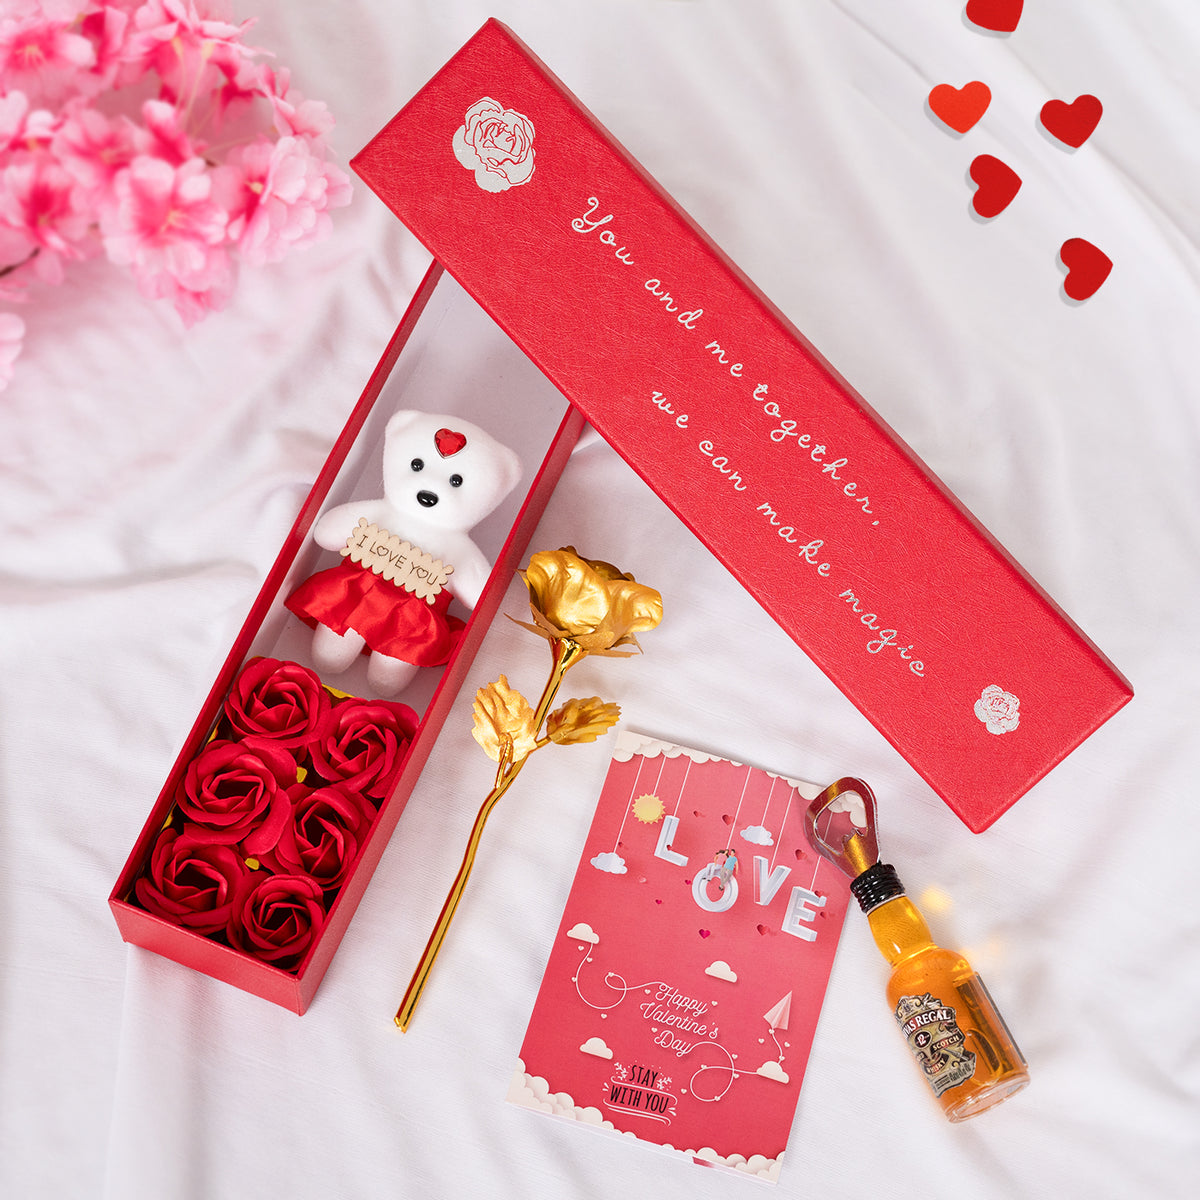 Artificial Rose Flower with Teddy Gift Box, Assorted Greeting Card, Bottle Opener Combo Gift